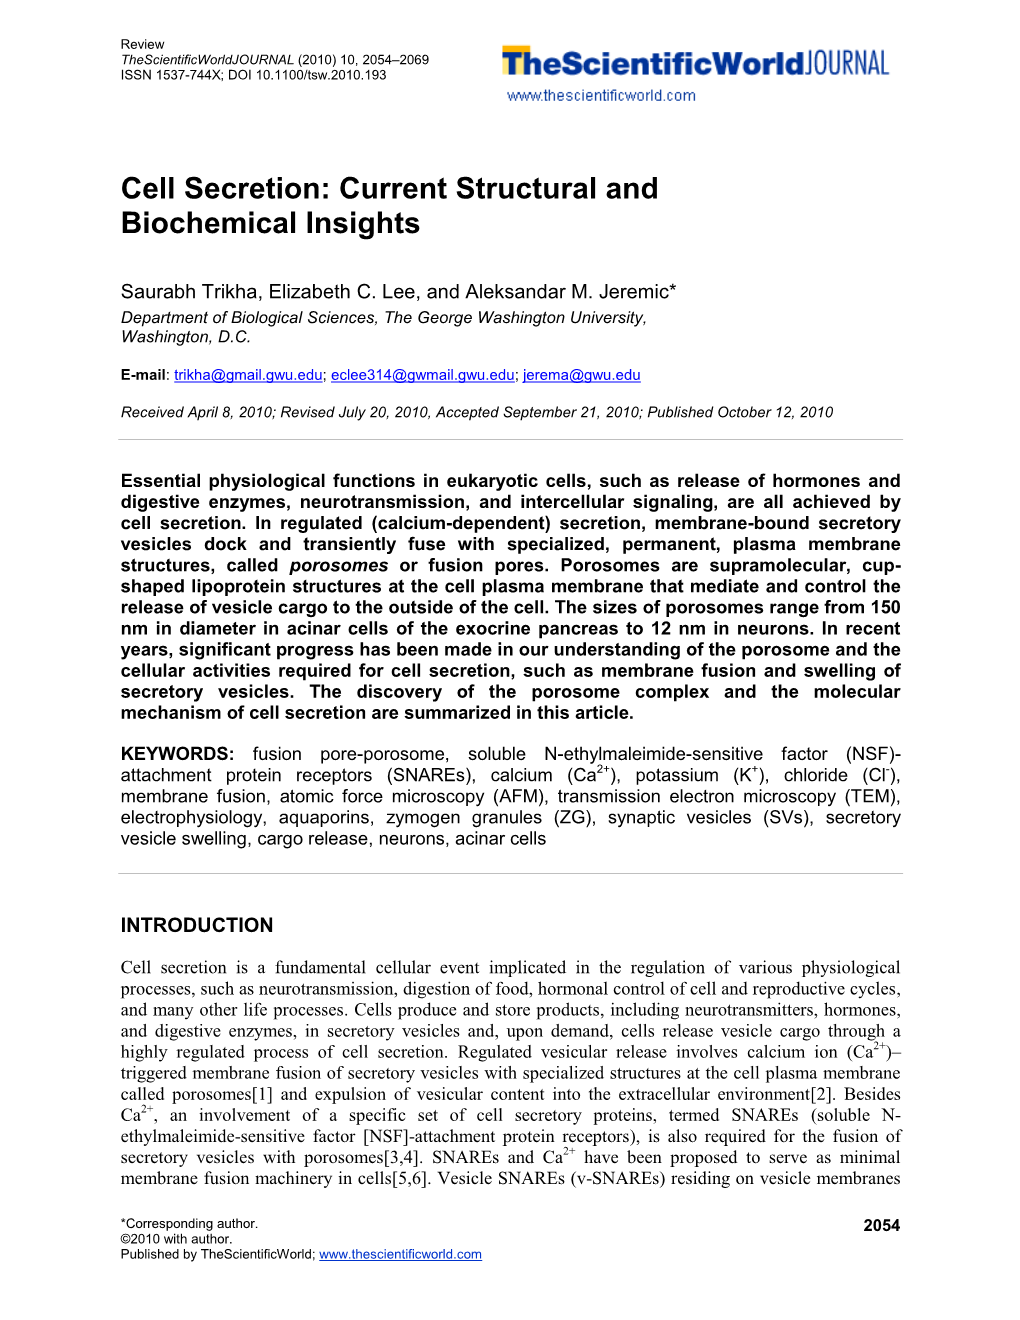 Cell Secretion: Current Structural and Biochemical Insights